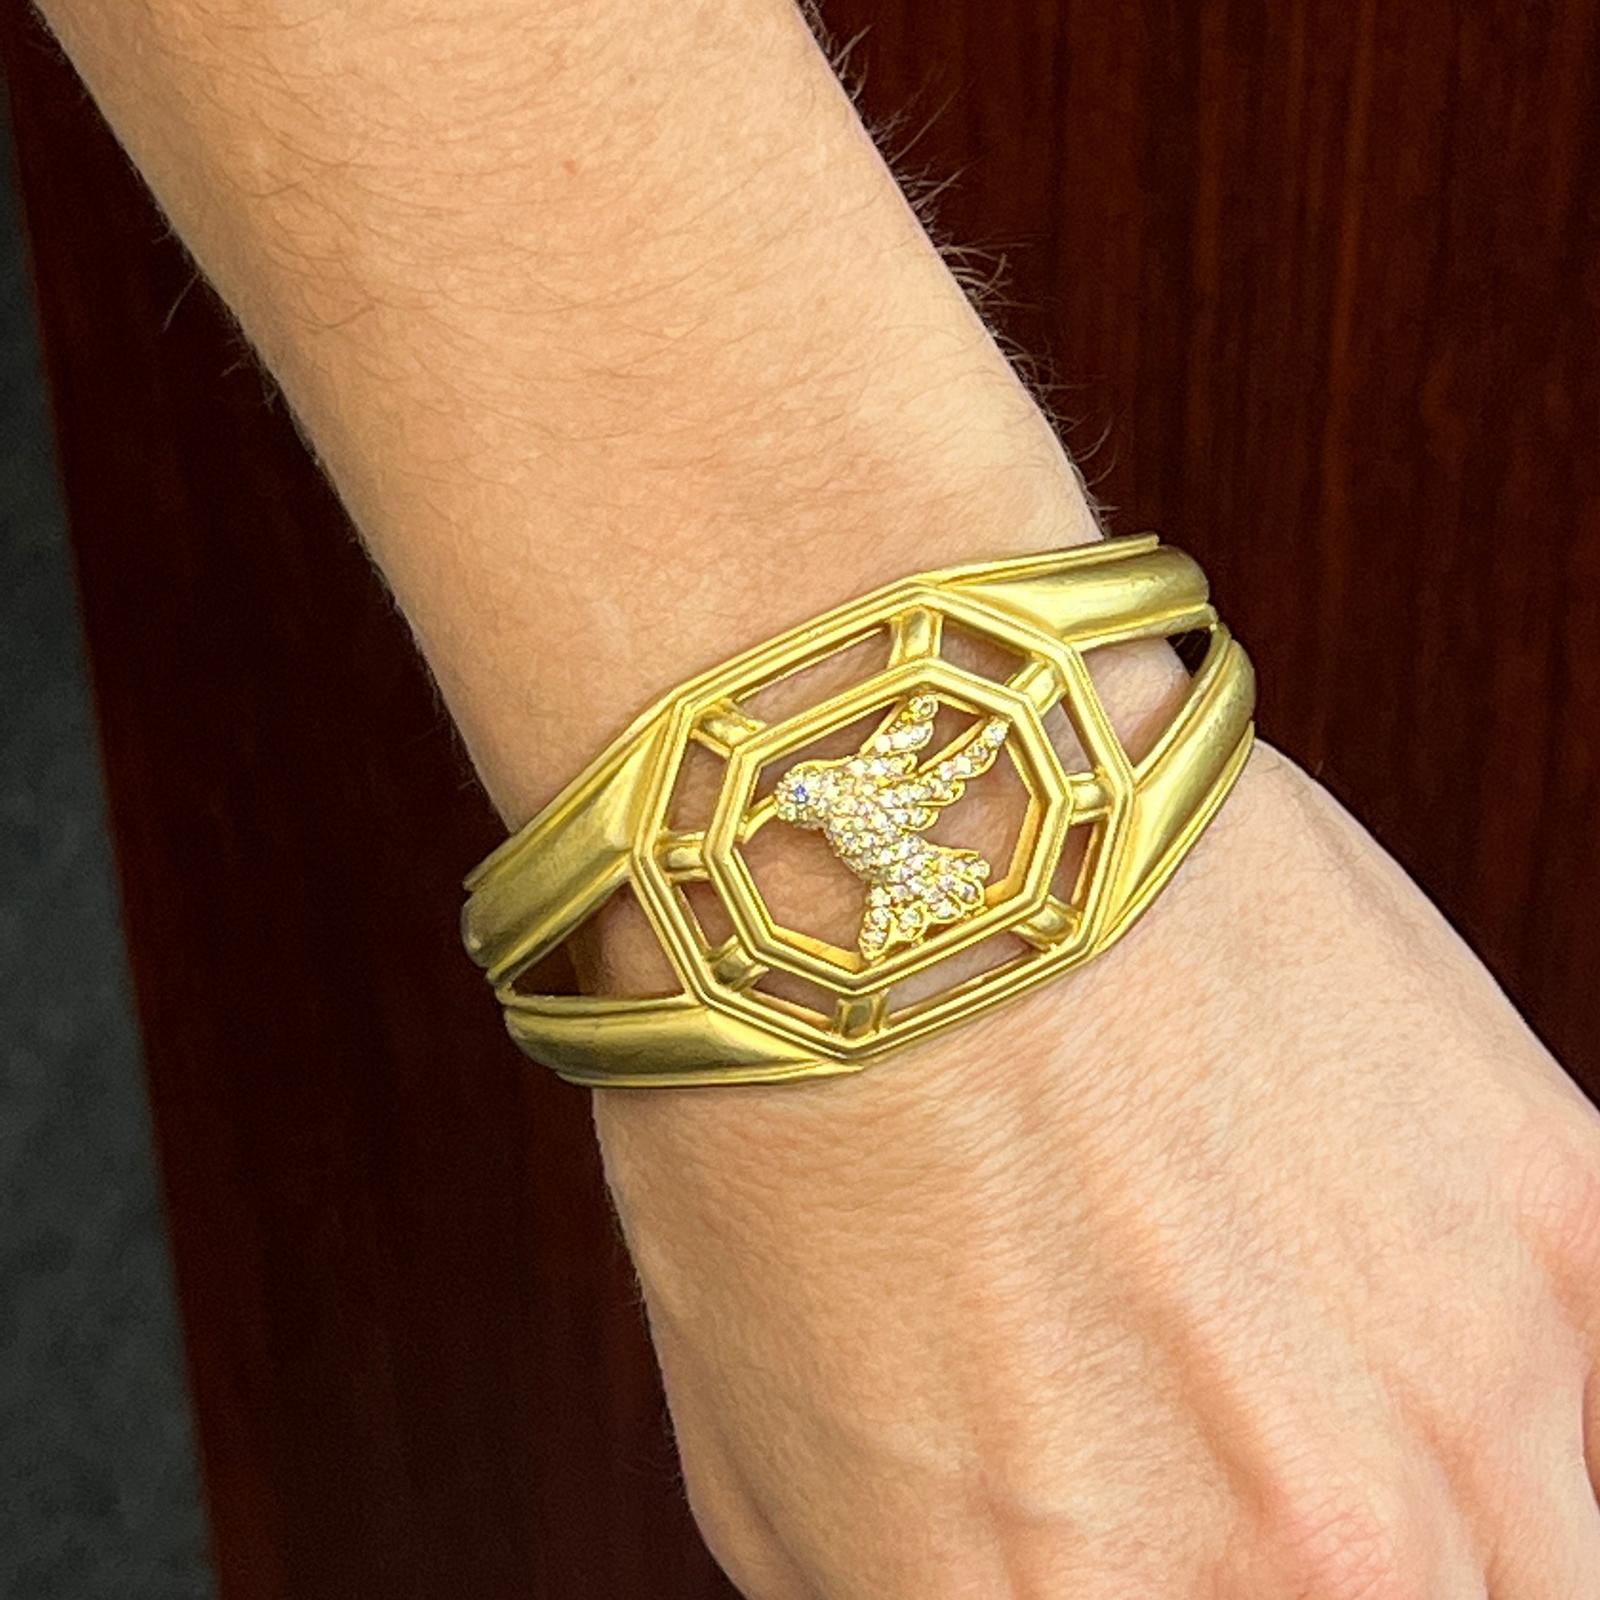 Beautiful Slane & Slane Diamond Hummingbird cuff bracelet fashioned in 18 karat yellow gold. The hummingbird is crafted in round brilliant cut diamonds weighing approximately .75 CTW and graded G/VS1. The cuff measures 1.25 inches in width, and